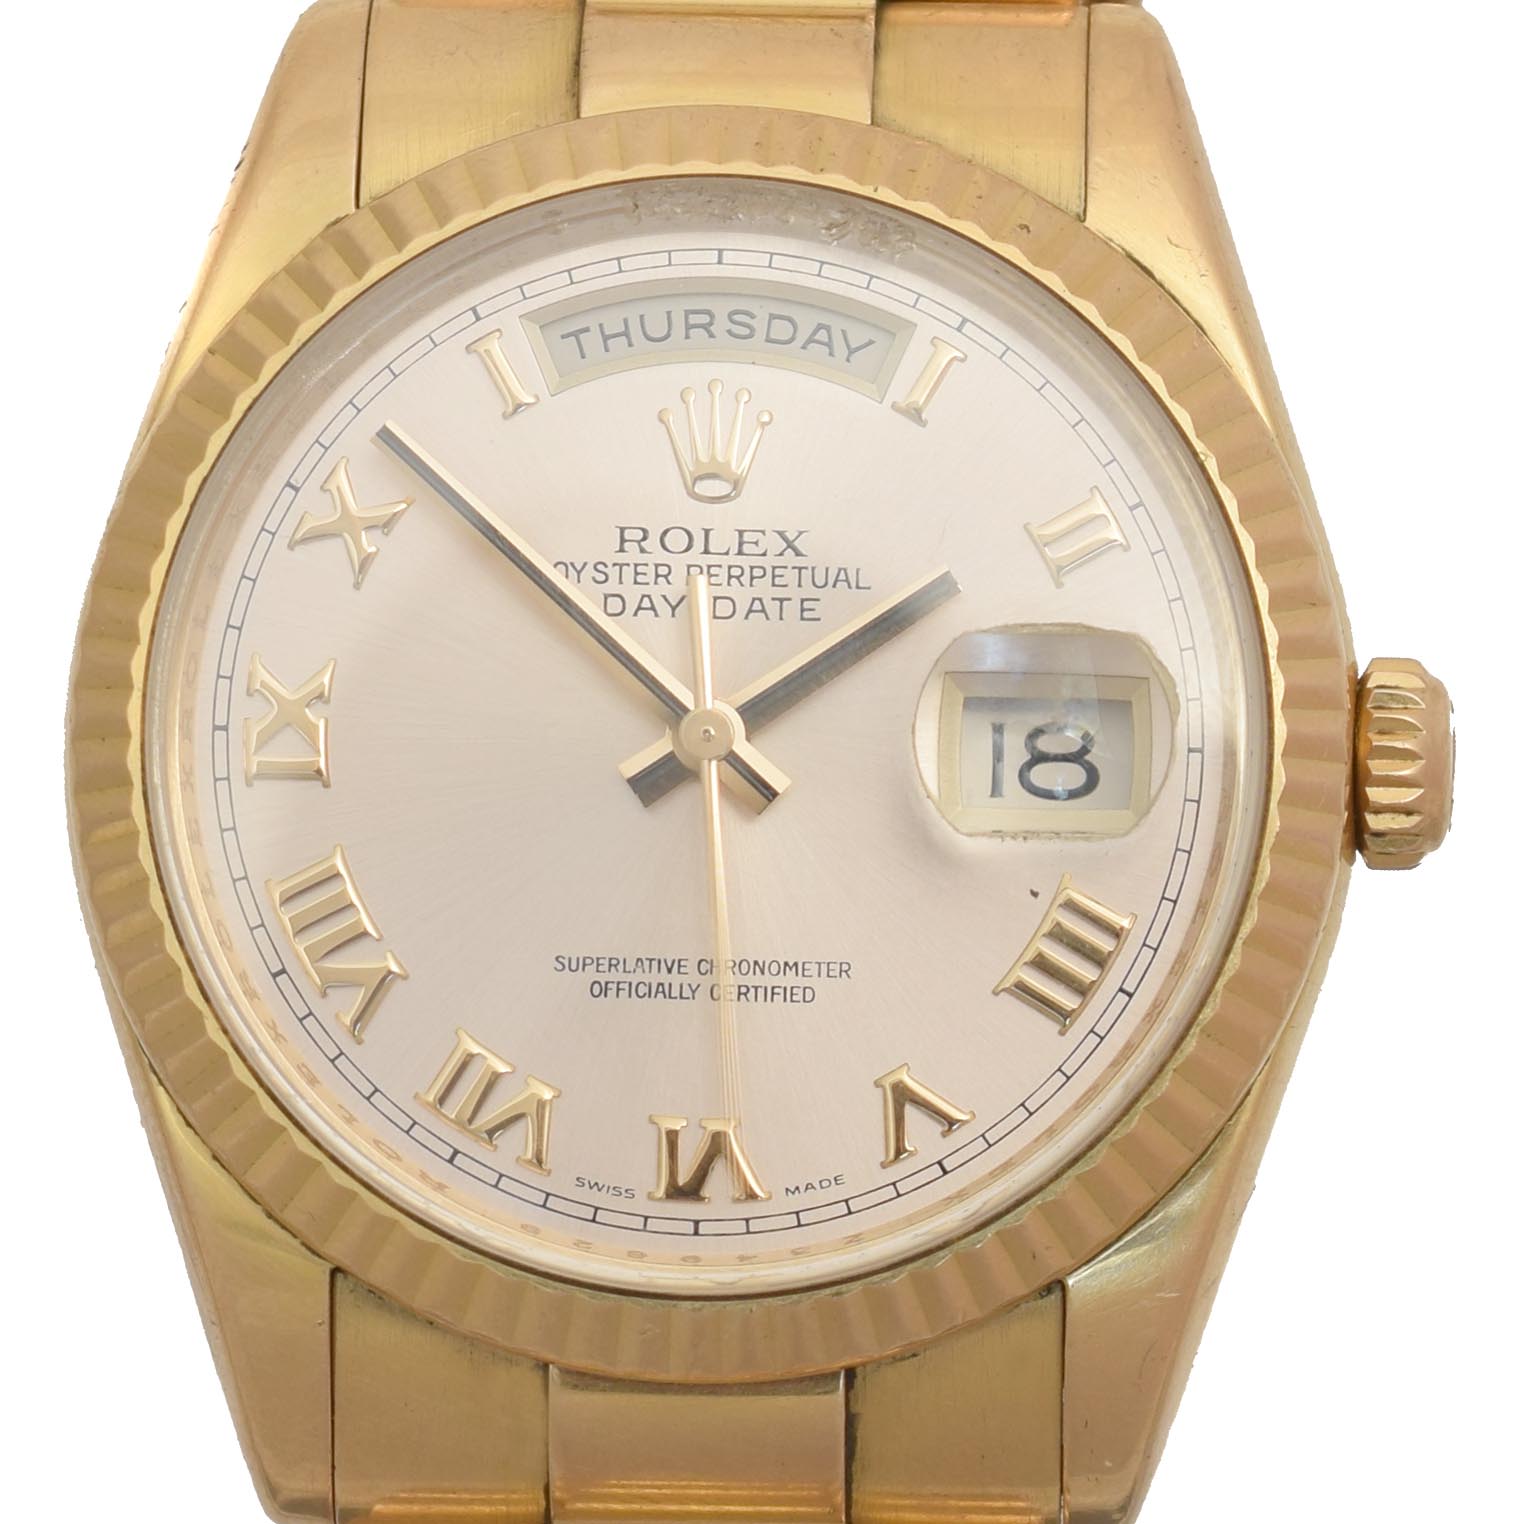 A gents 18ct gold Rolex Oyster Perpetual Day-Date wristwatch, circa 2006-7, the circular signed dial with Roman numeral hour markers, date aperture to 3 and day aperture to 12, with fluted bezel and president bracelet, model no. 118235, Z349629, Swiss assay marks, case diameter 36mm, with single spare link and papers. Sold for £8,540